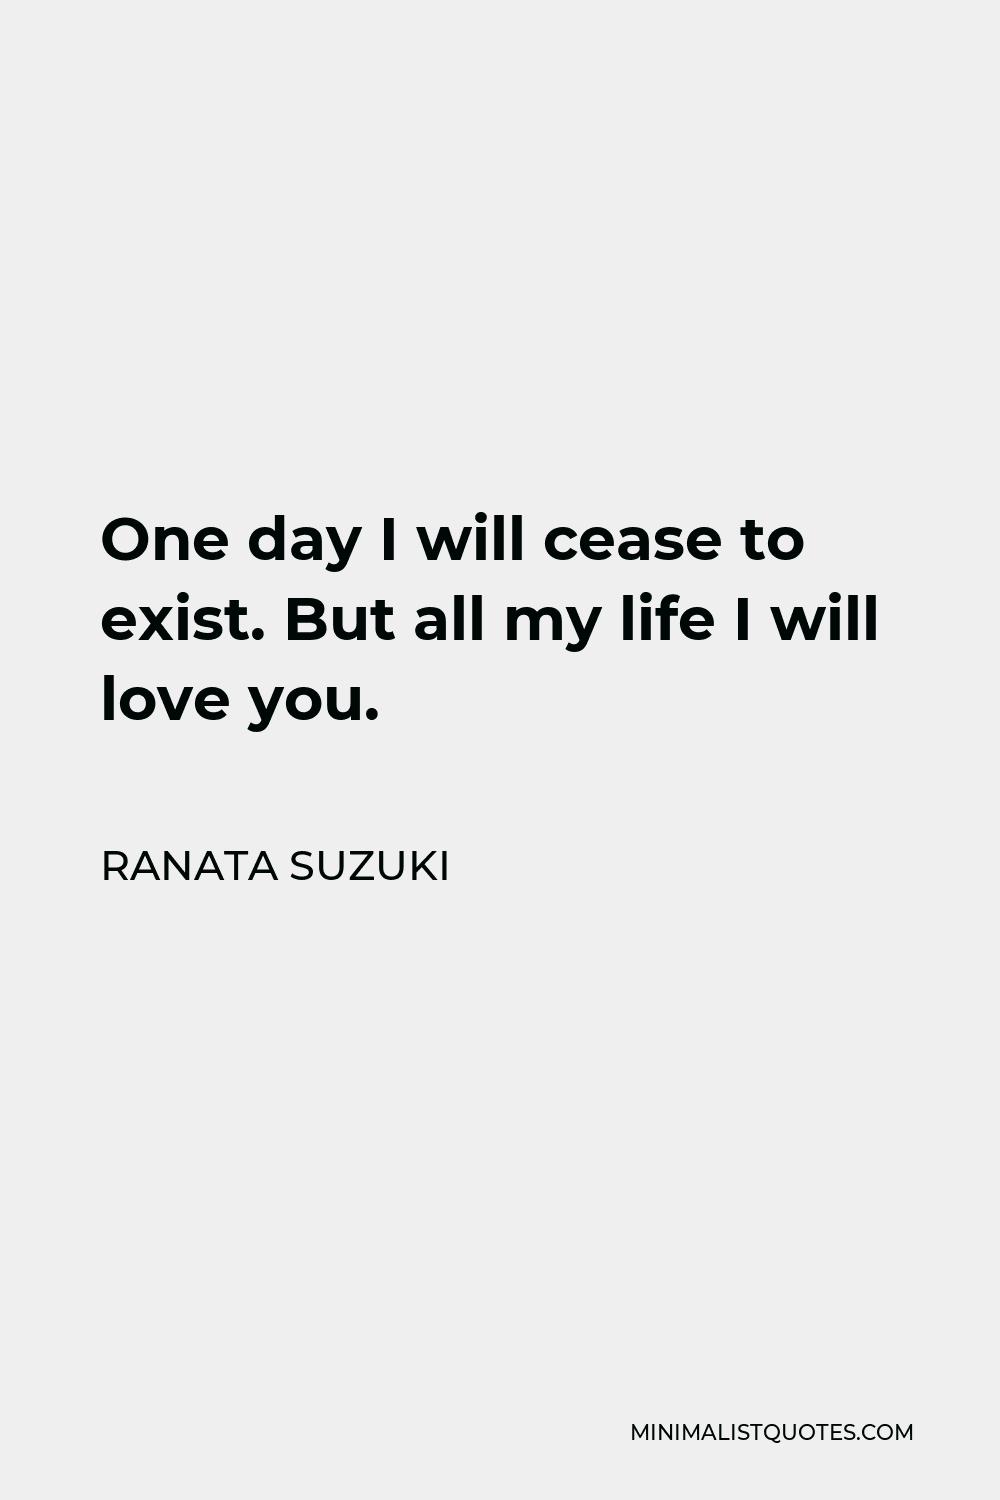 Ranata Suzuki Quote - One day I will cease to exist. But all my life I will love you.